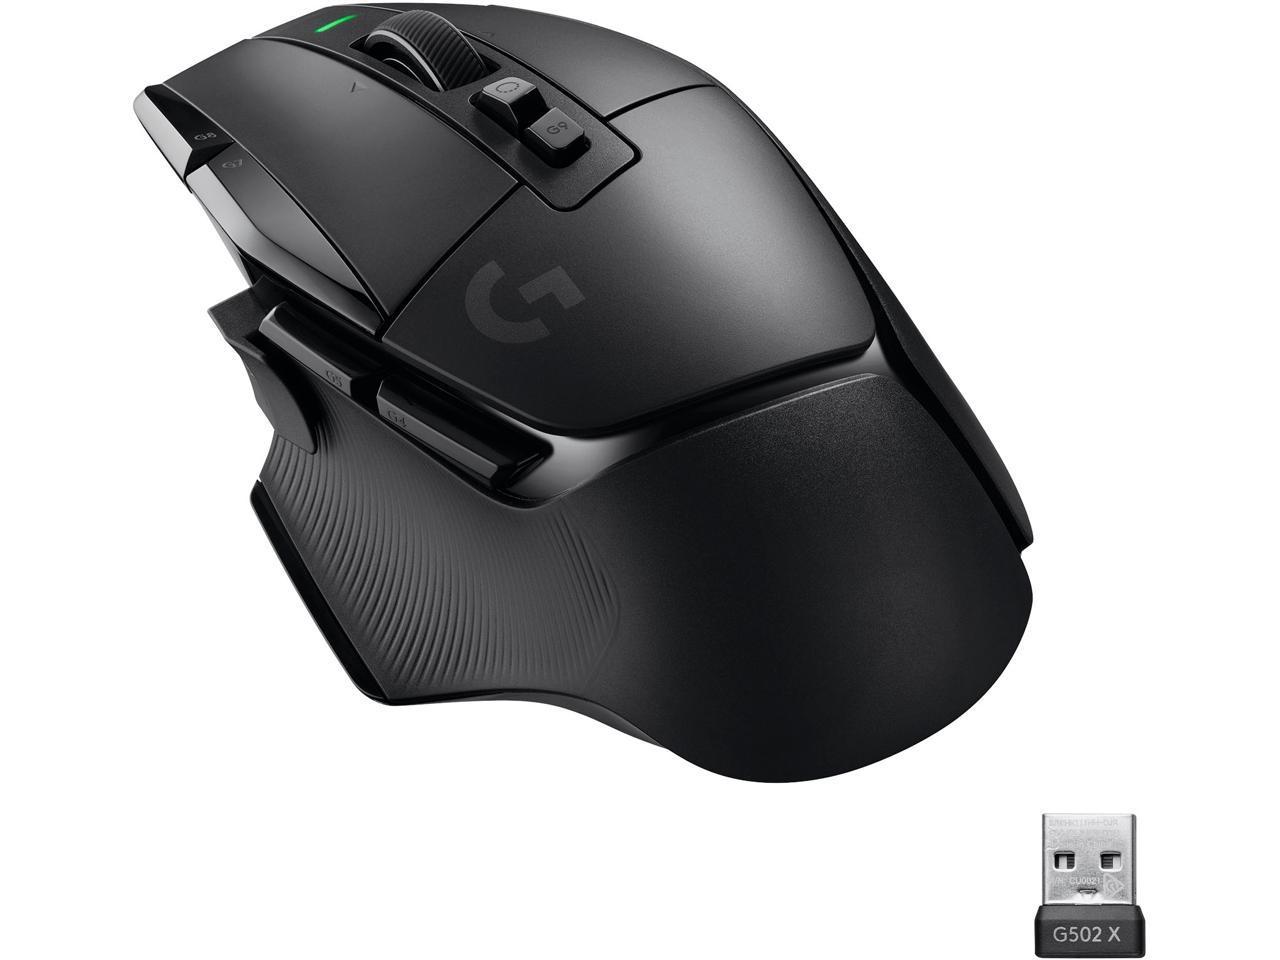 G502 X LIGHTSPEED GAMING MOUSE